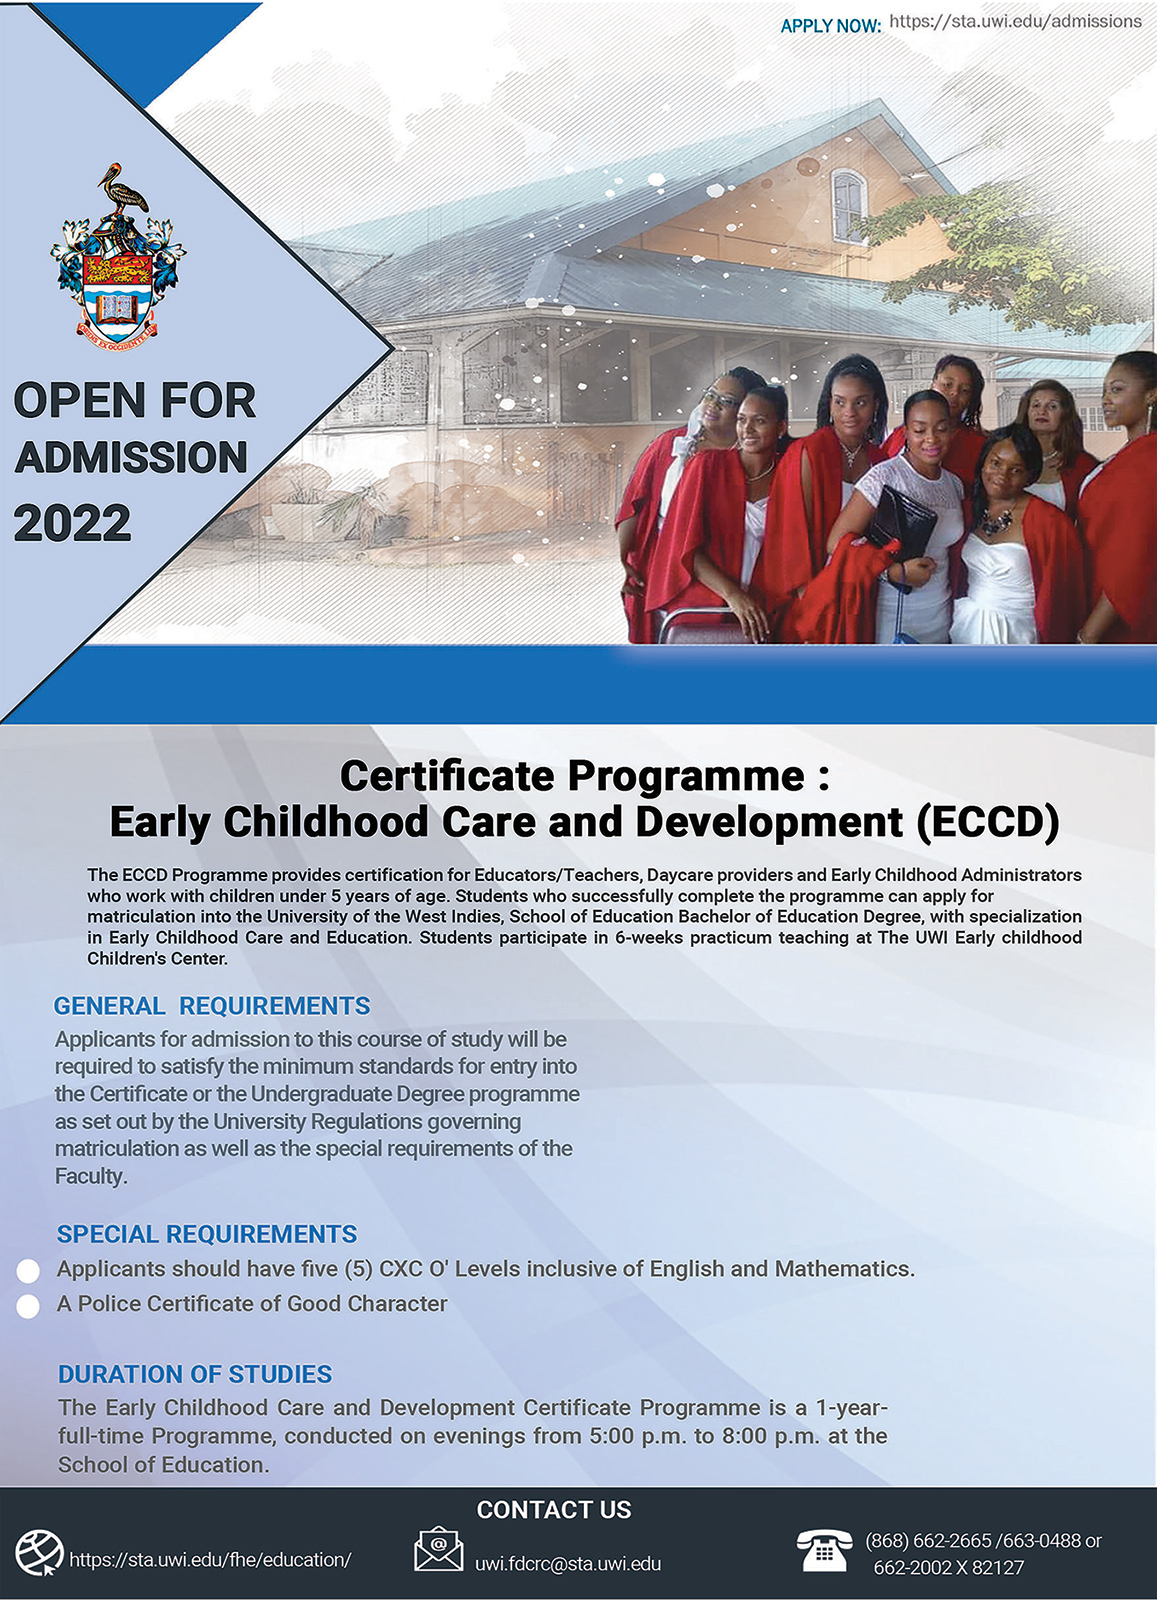 Early Childhood Care and Development School of Education